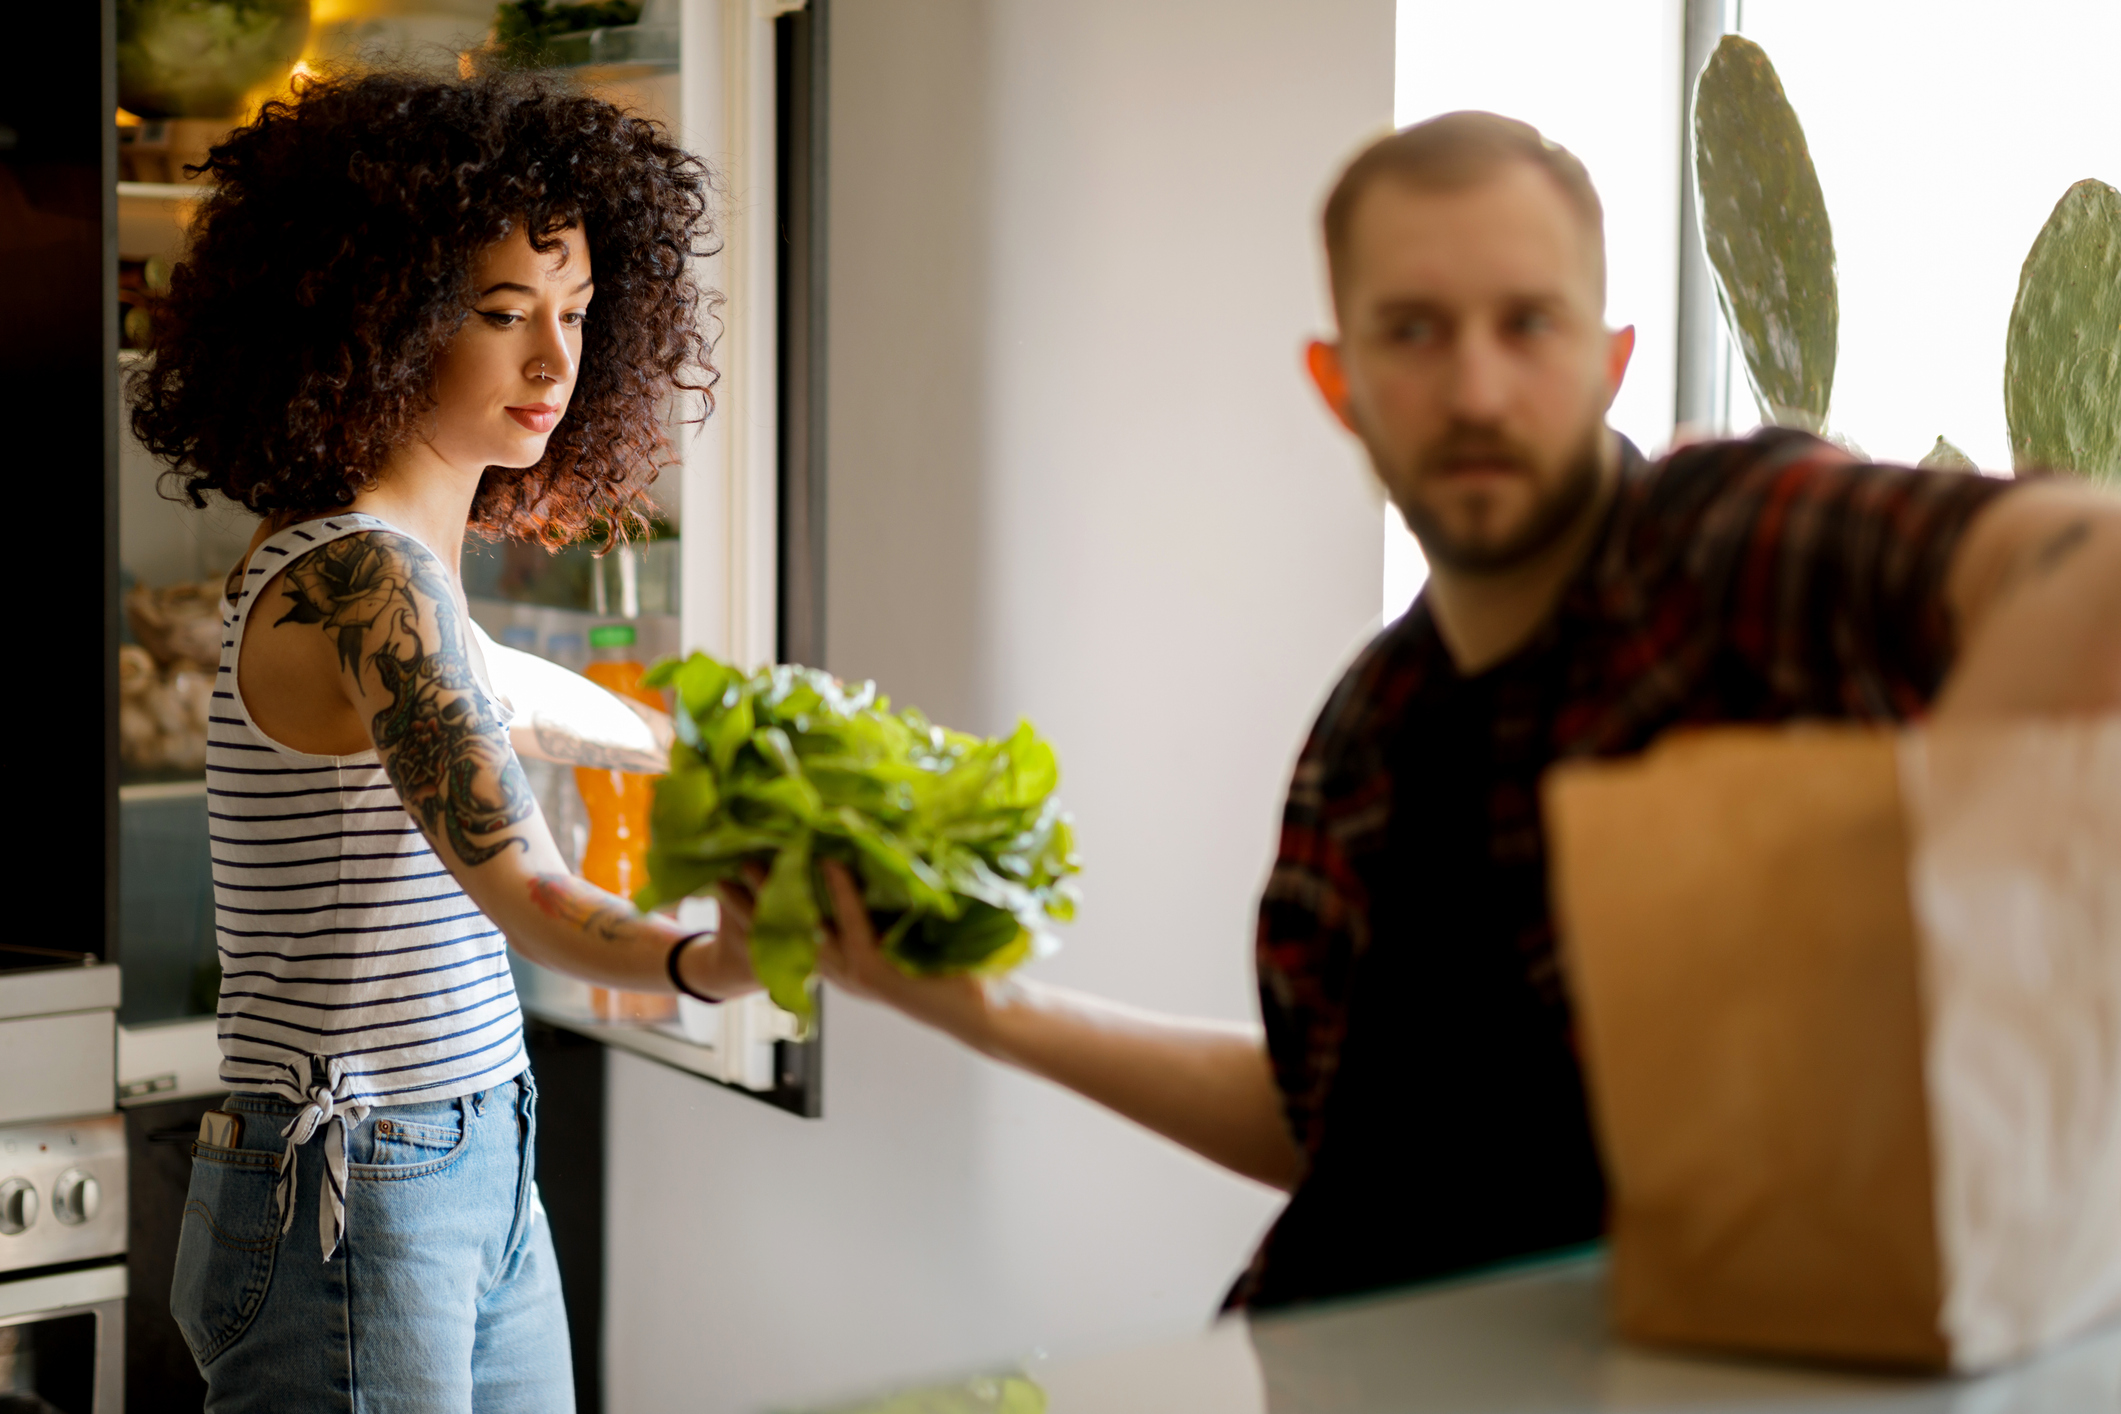 Young man passing lettuce and other groceries to female roomate opening the fridge